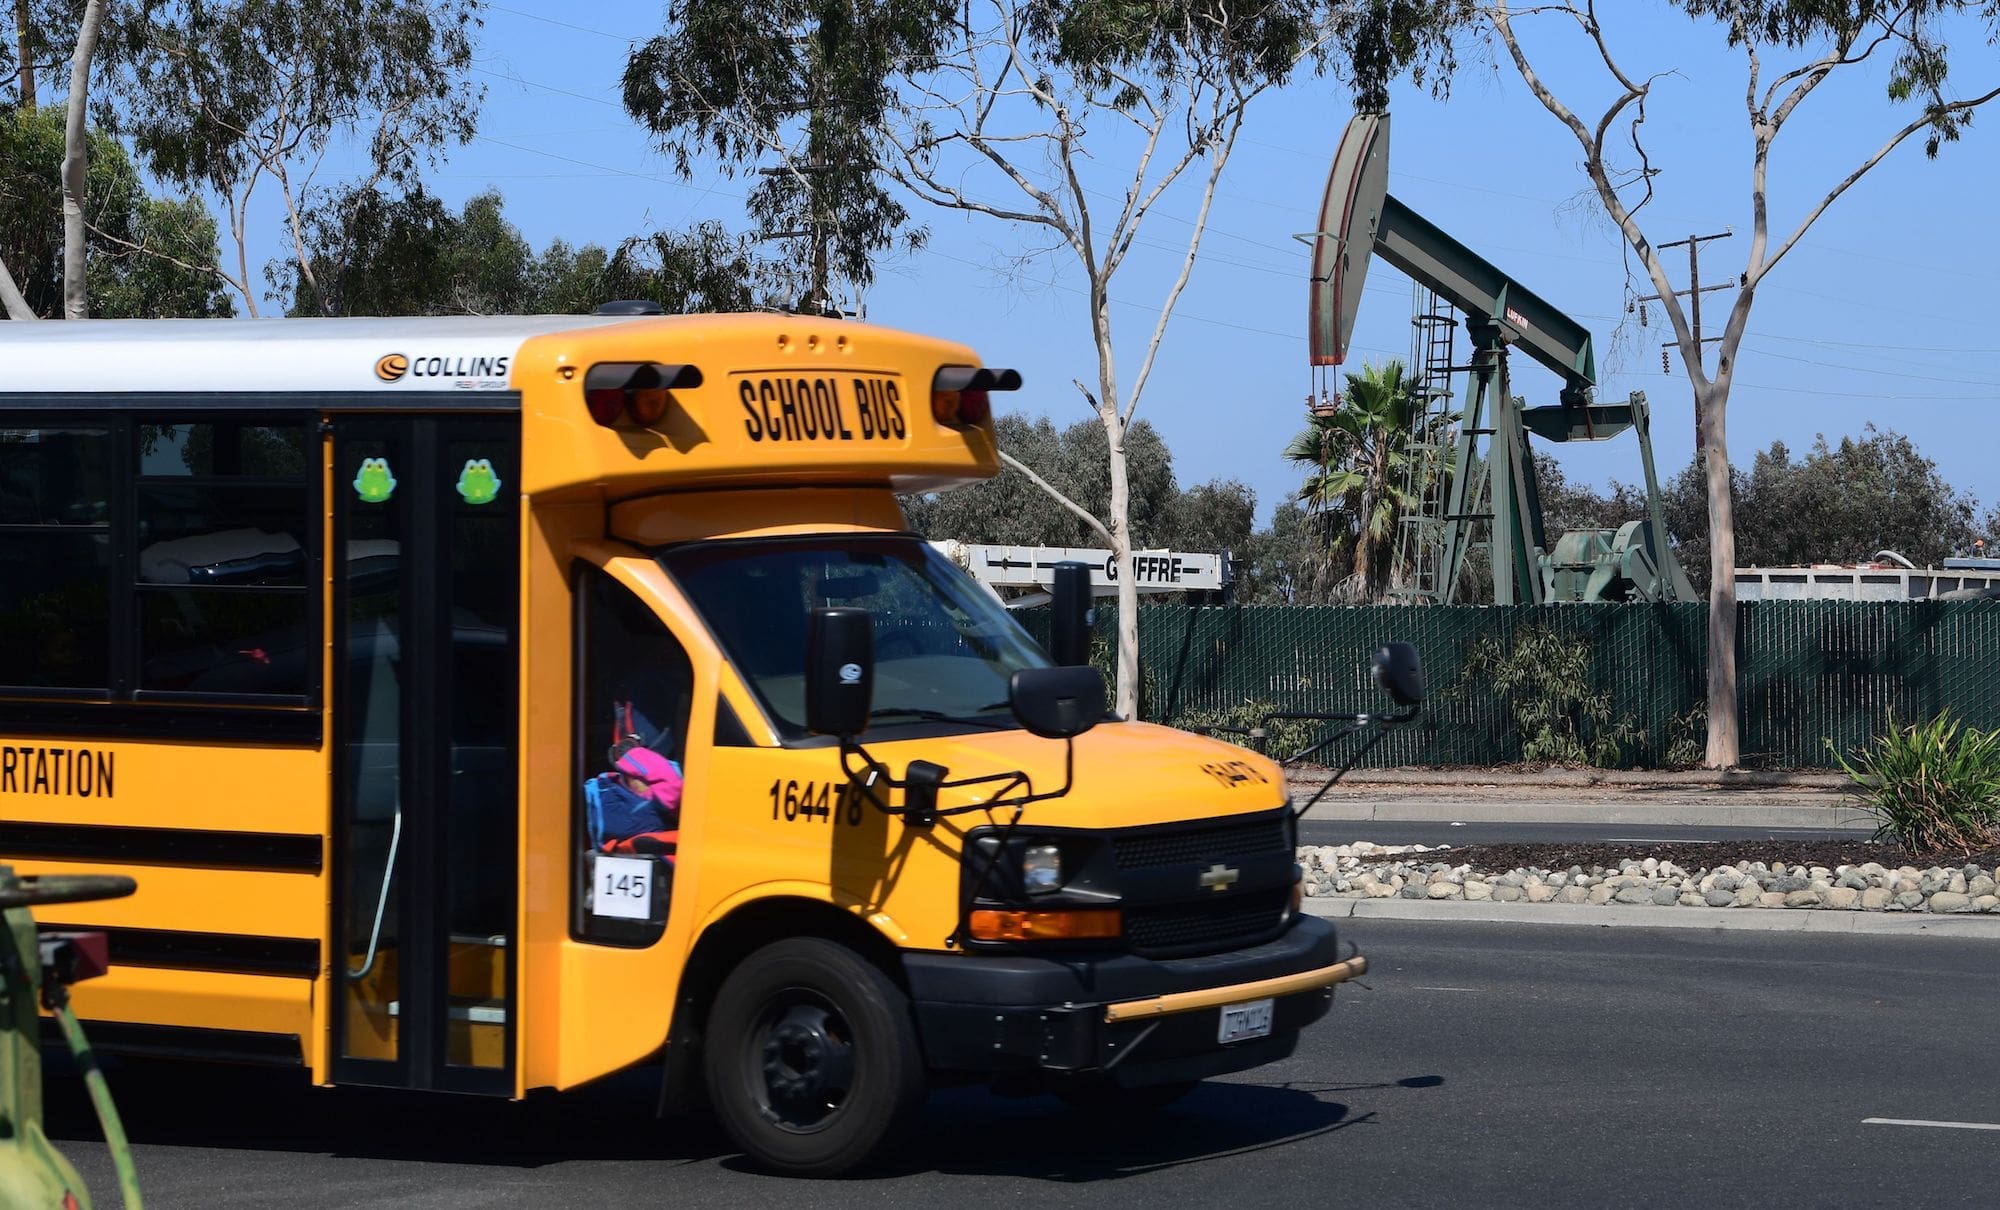 a yellow school bus parked on a street with an oil derrick visible nearby